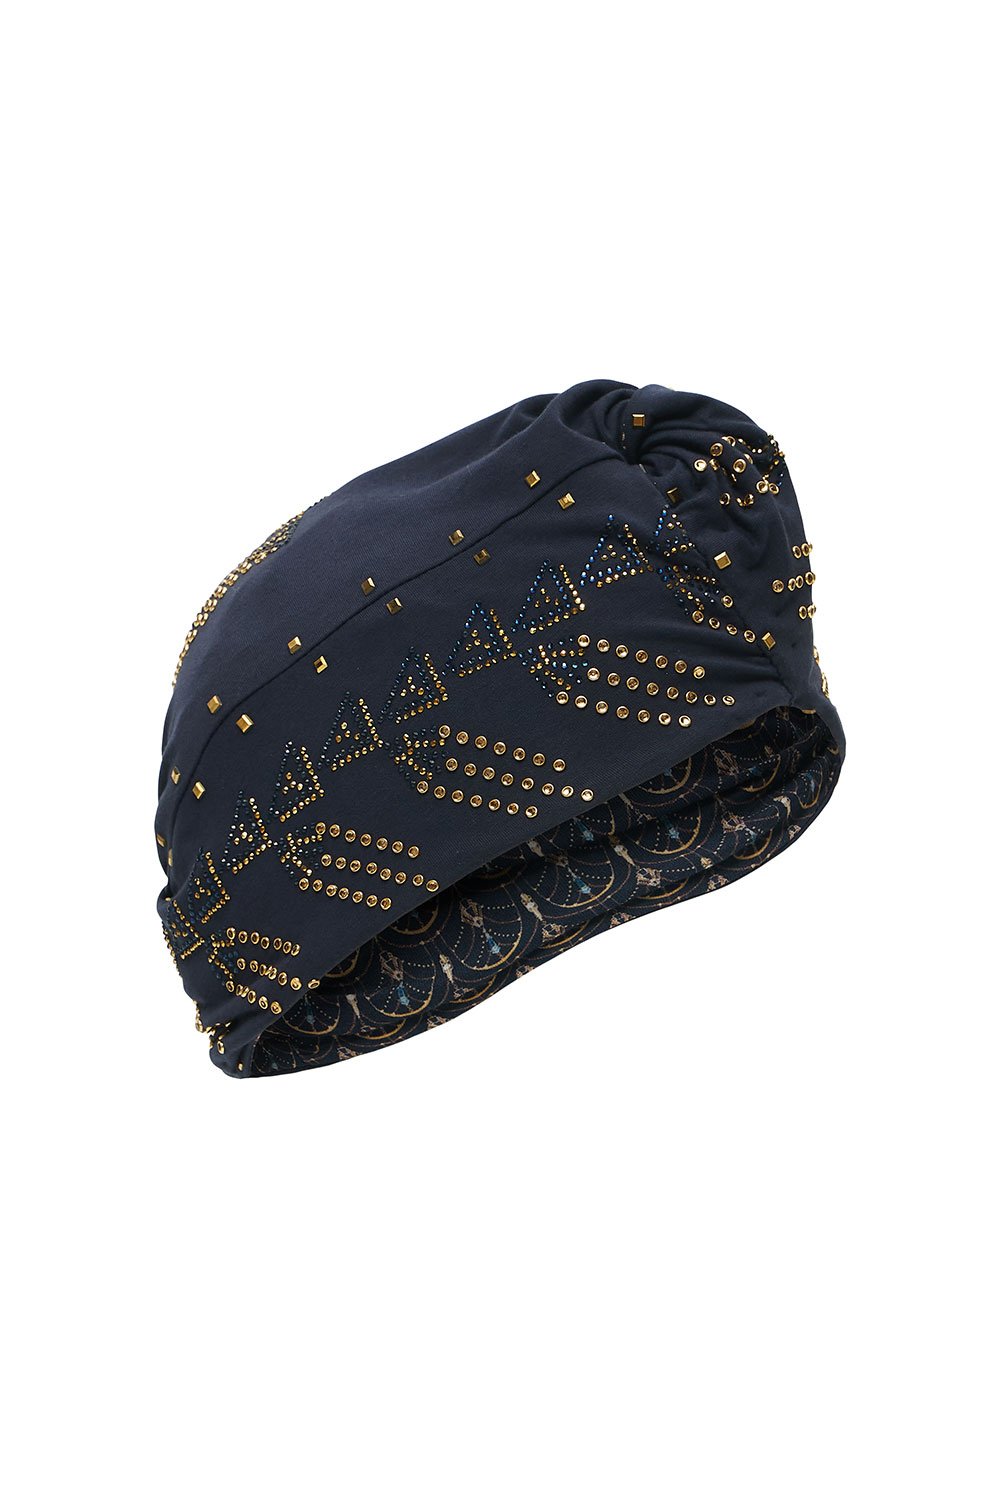 KNOT FRONT TURBAN LUXE NAVY